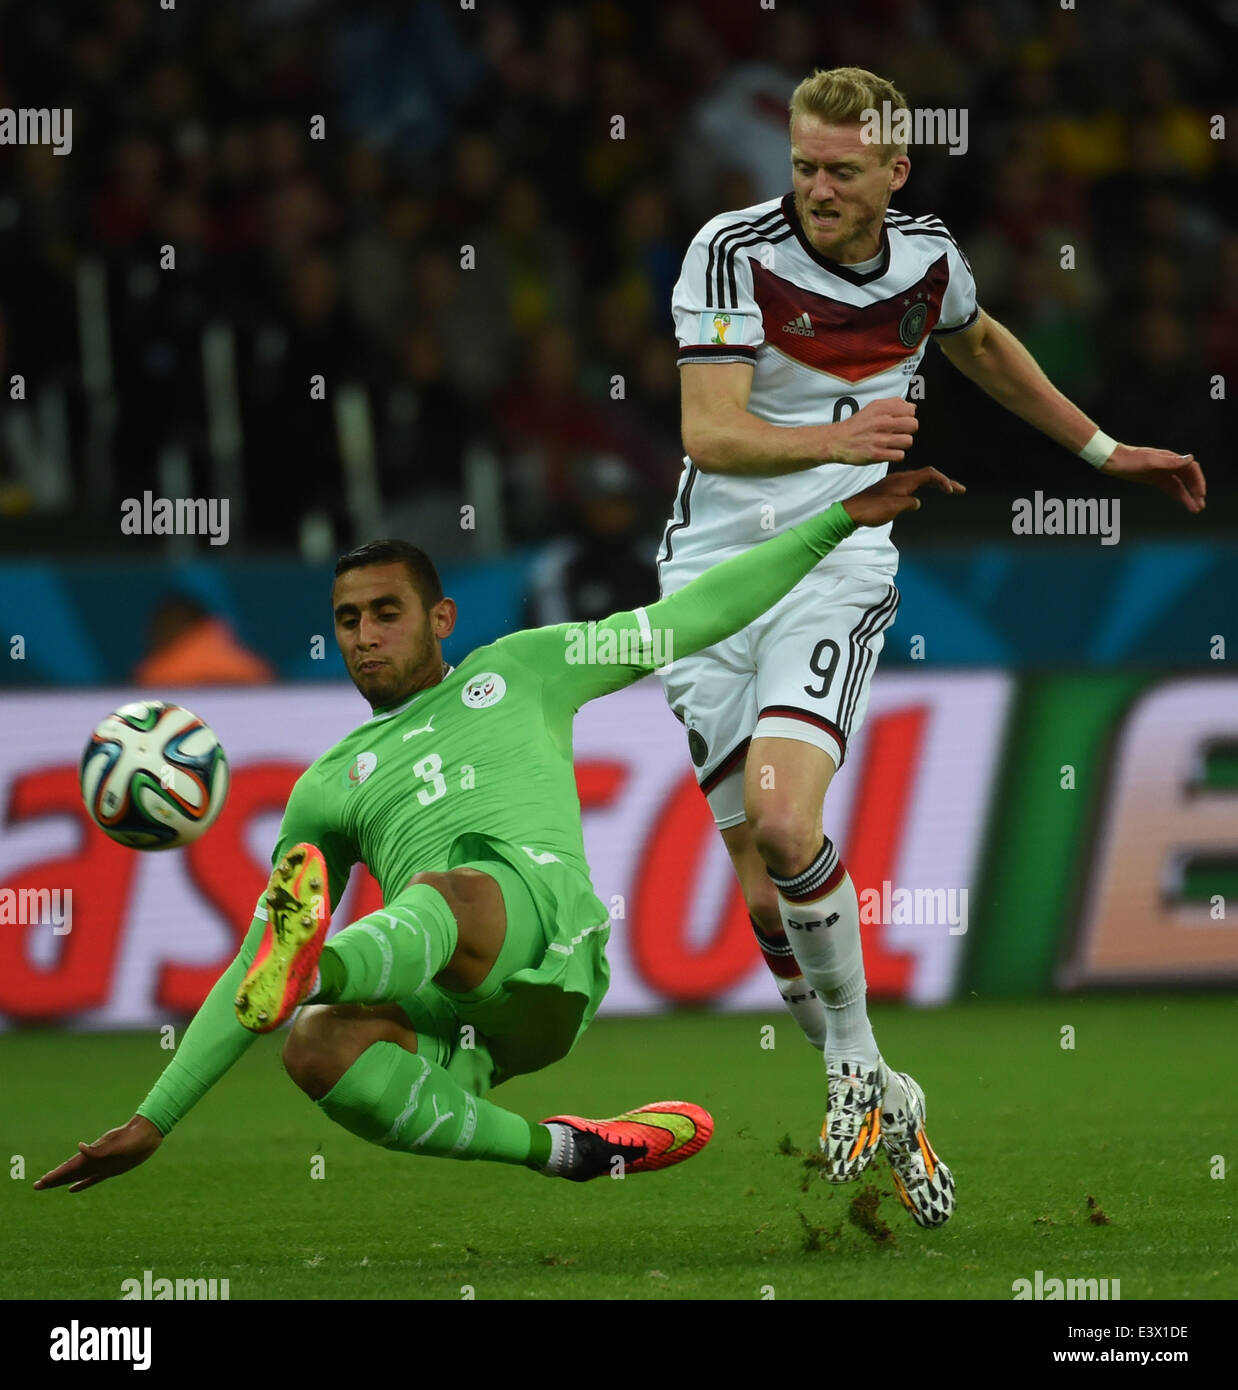 Porto Alegre, Brazil. 30th June, 2014. Algeria's Faouzi Ghoualm (L) vies with Germany's Andre Schurrle during a Round of 16 match between Germany and Algeria of 2014 FIFA World Cup at the Estadio Beira-Rio Stadium in Porto Alegre, Brazil, on June 30, 2014. Credit:  Li Ga/Xinhua/Alamy Live News Stock Photo